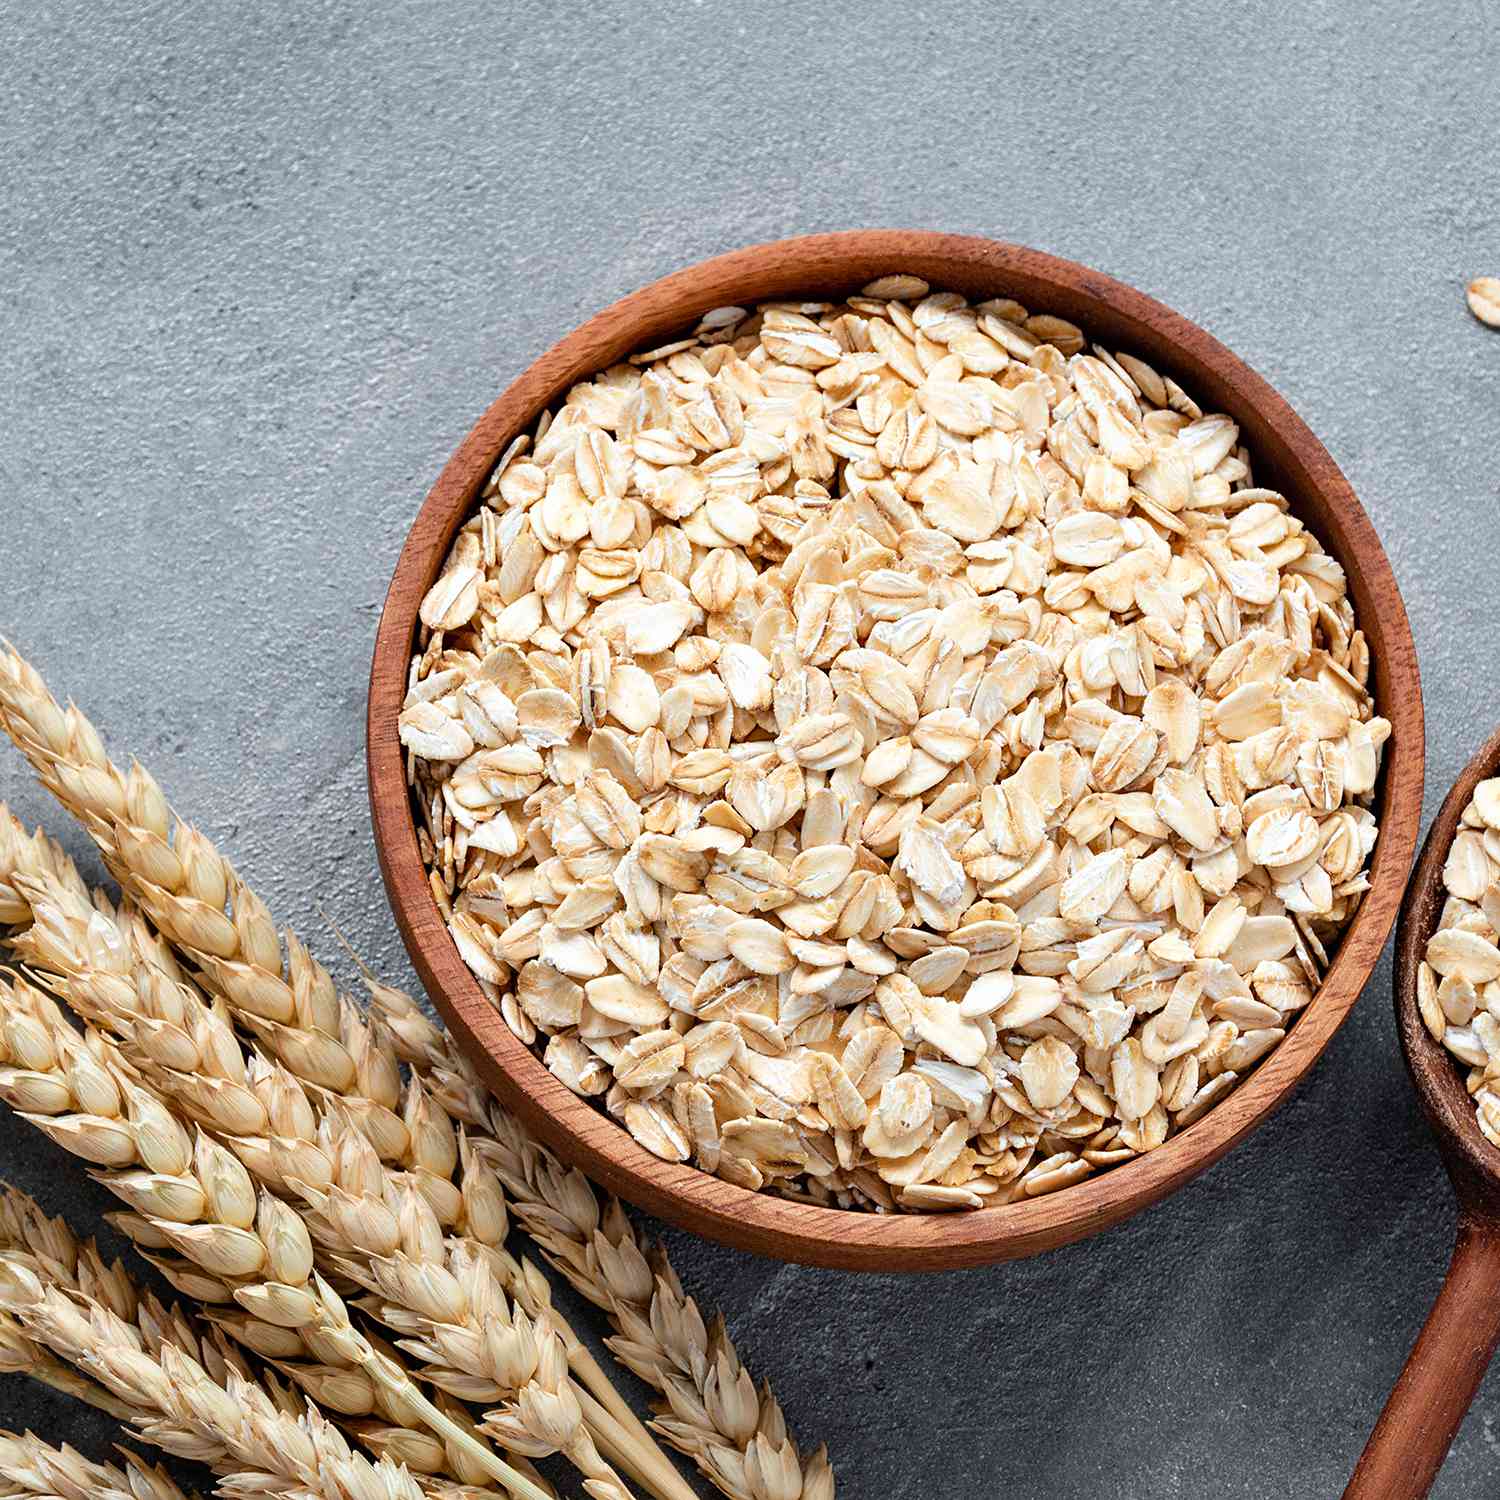 Rolled oats or oat flakes in wooden bowl